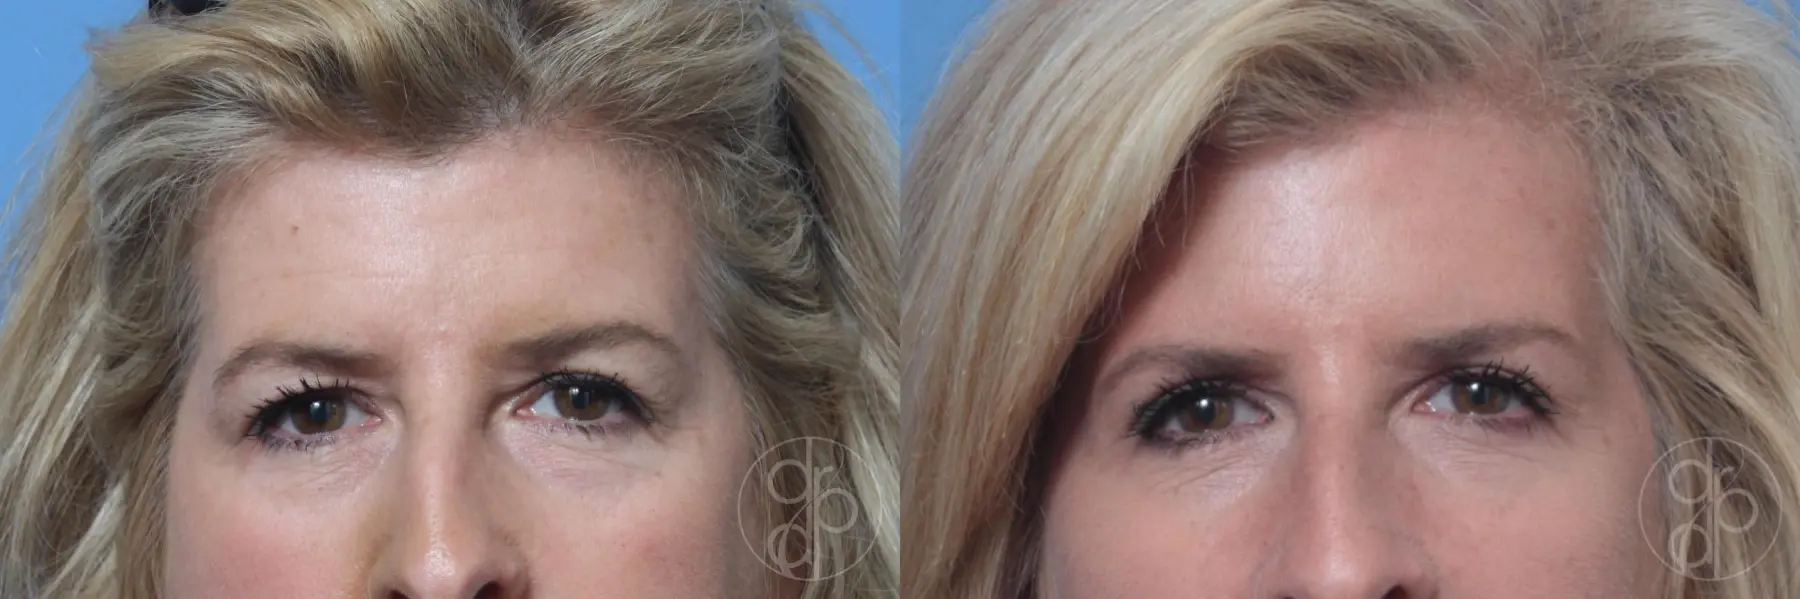 patient 10616 blepharoplasty before and after result - Before and After